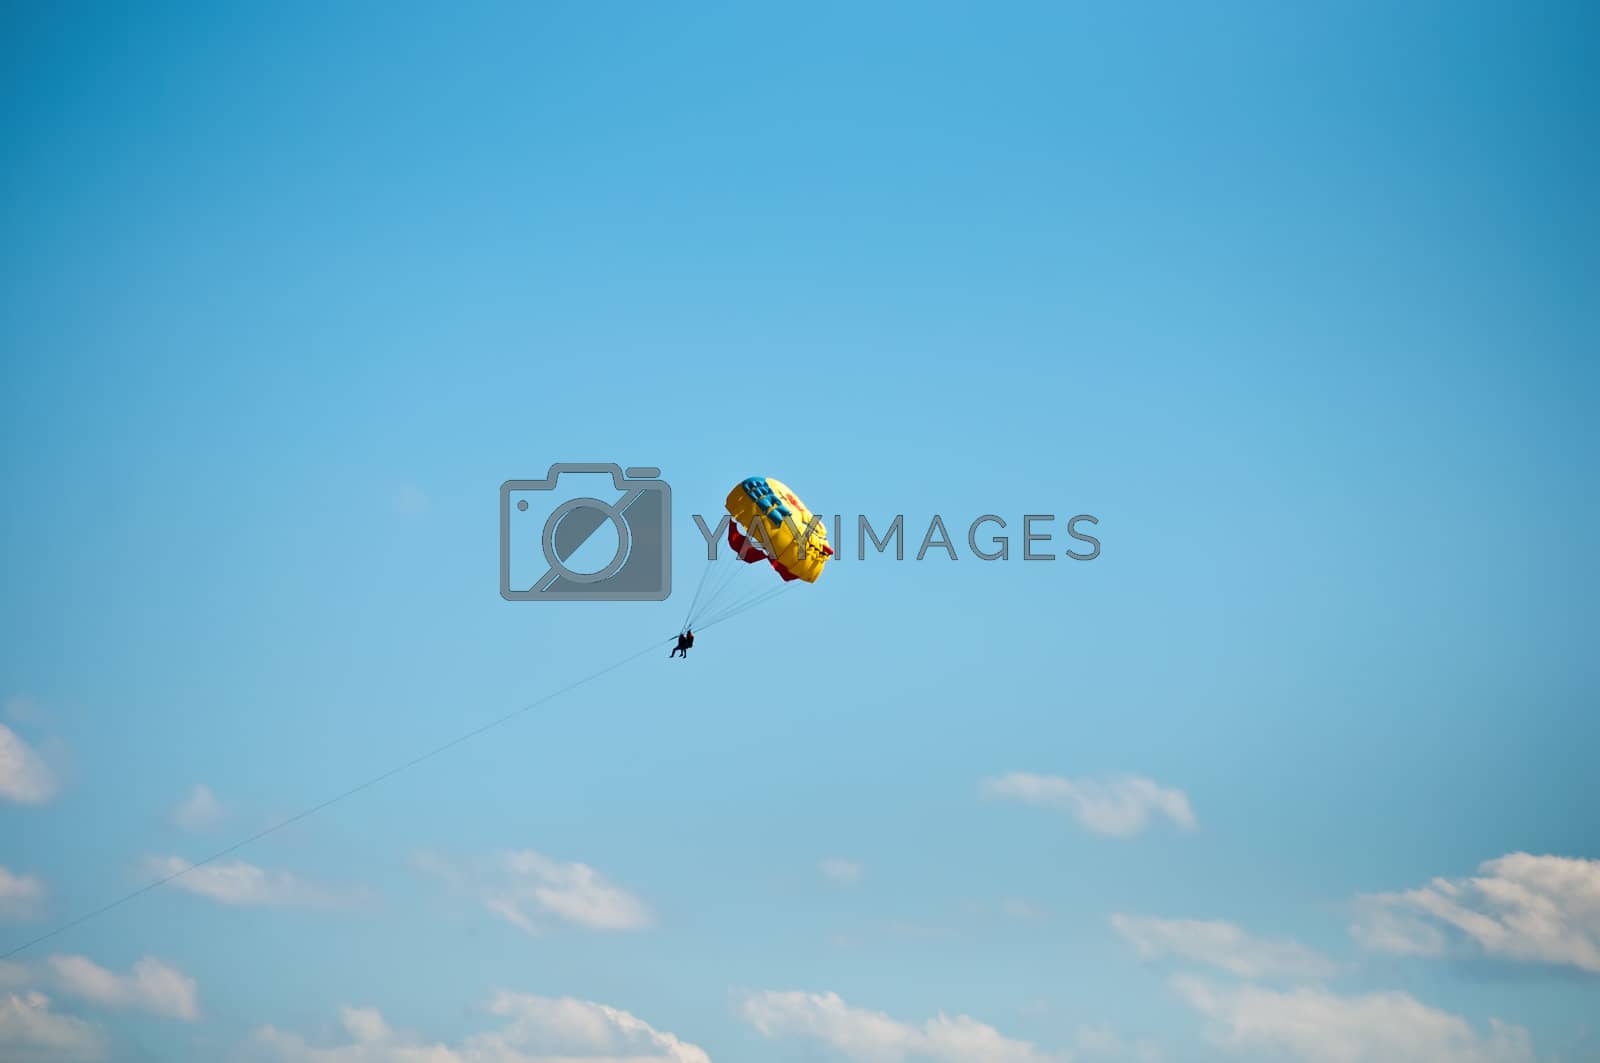 Royalty free image of Parasailing in summer . by LarisaP